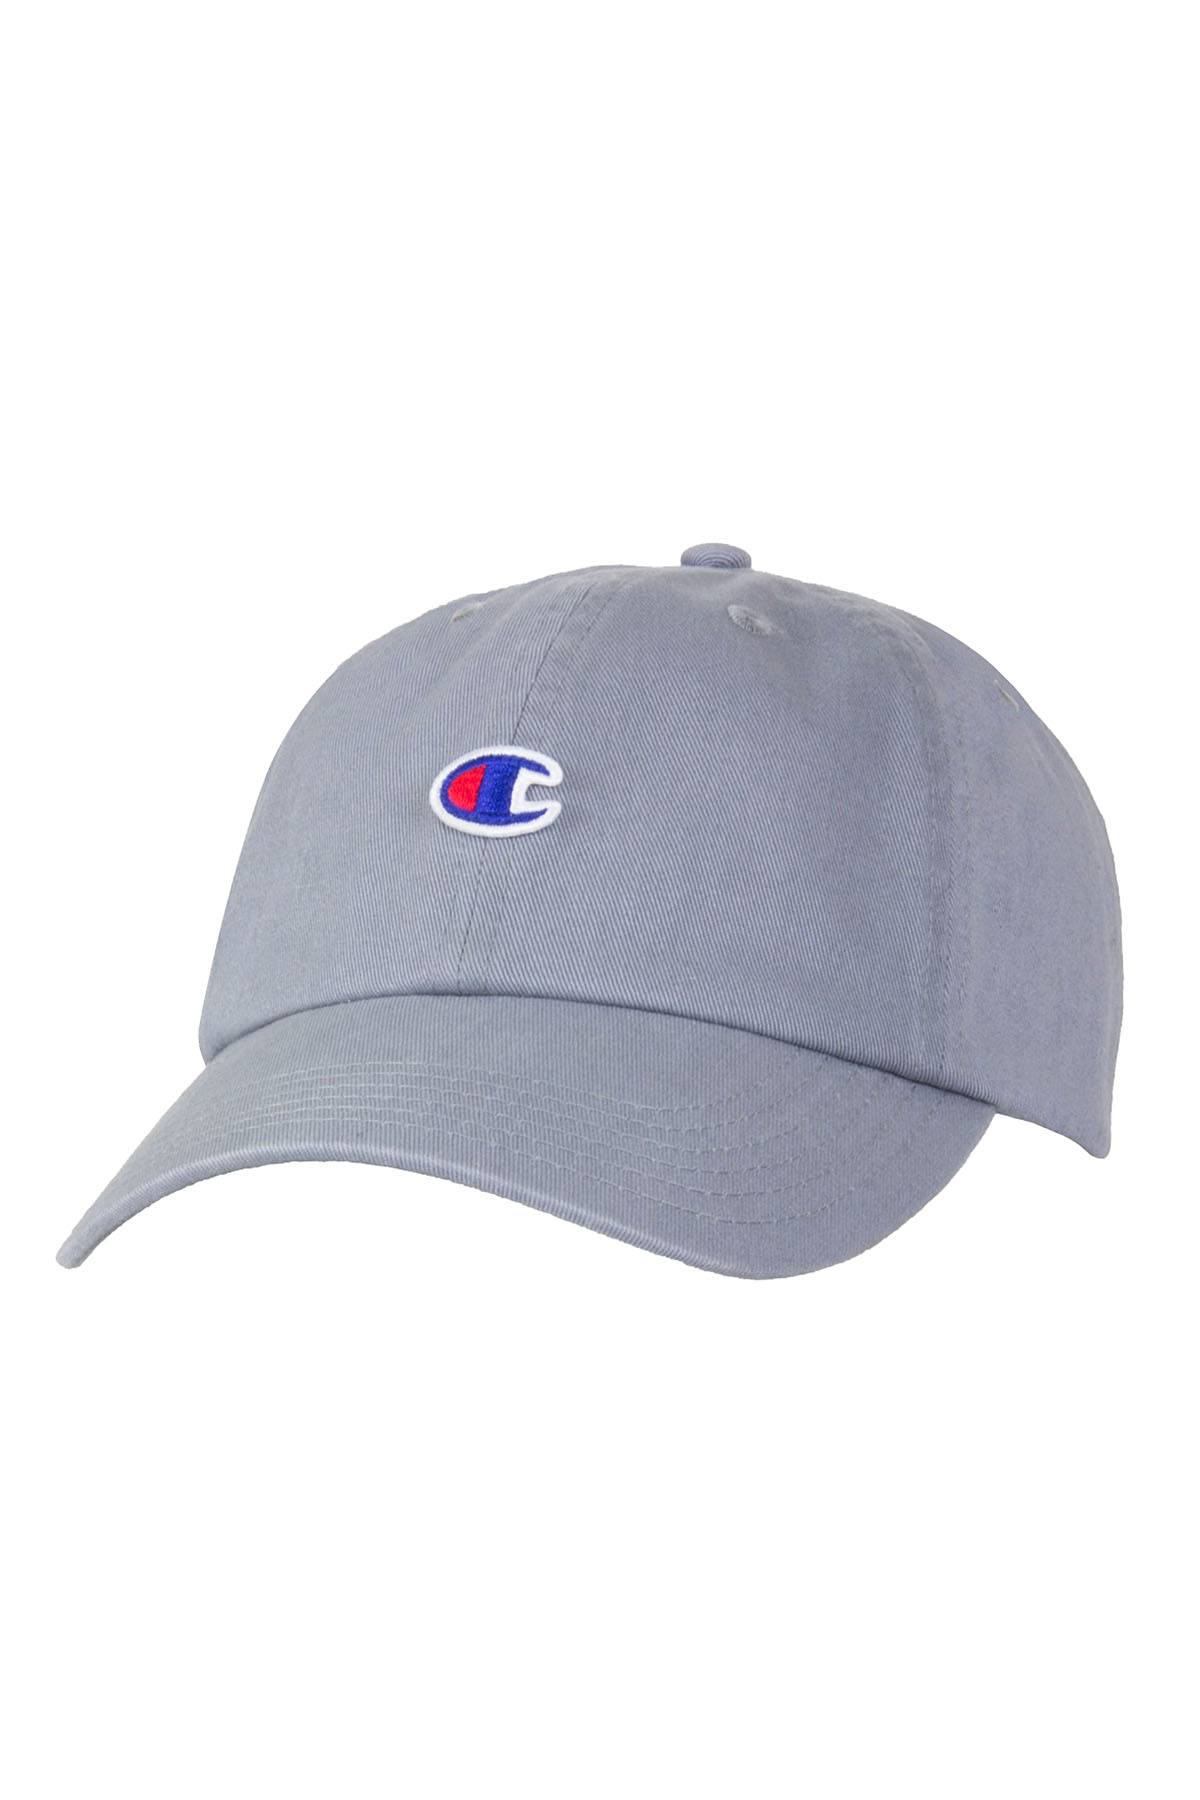 Champion Light Grey 'Our Father' Adjustable Dad Hat